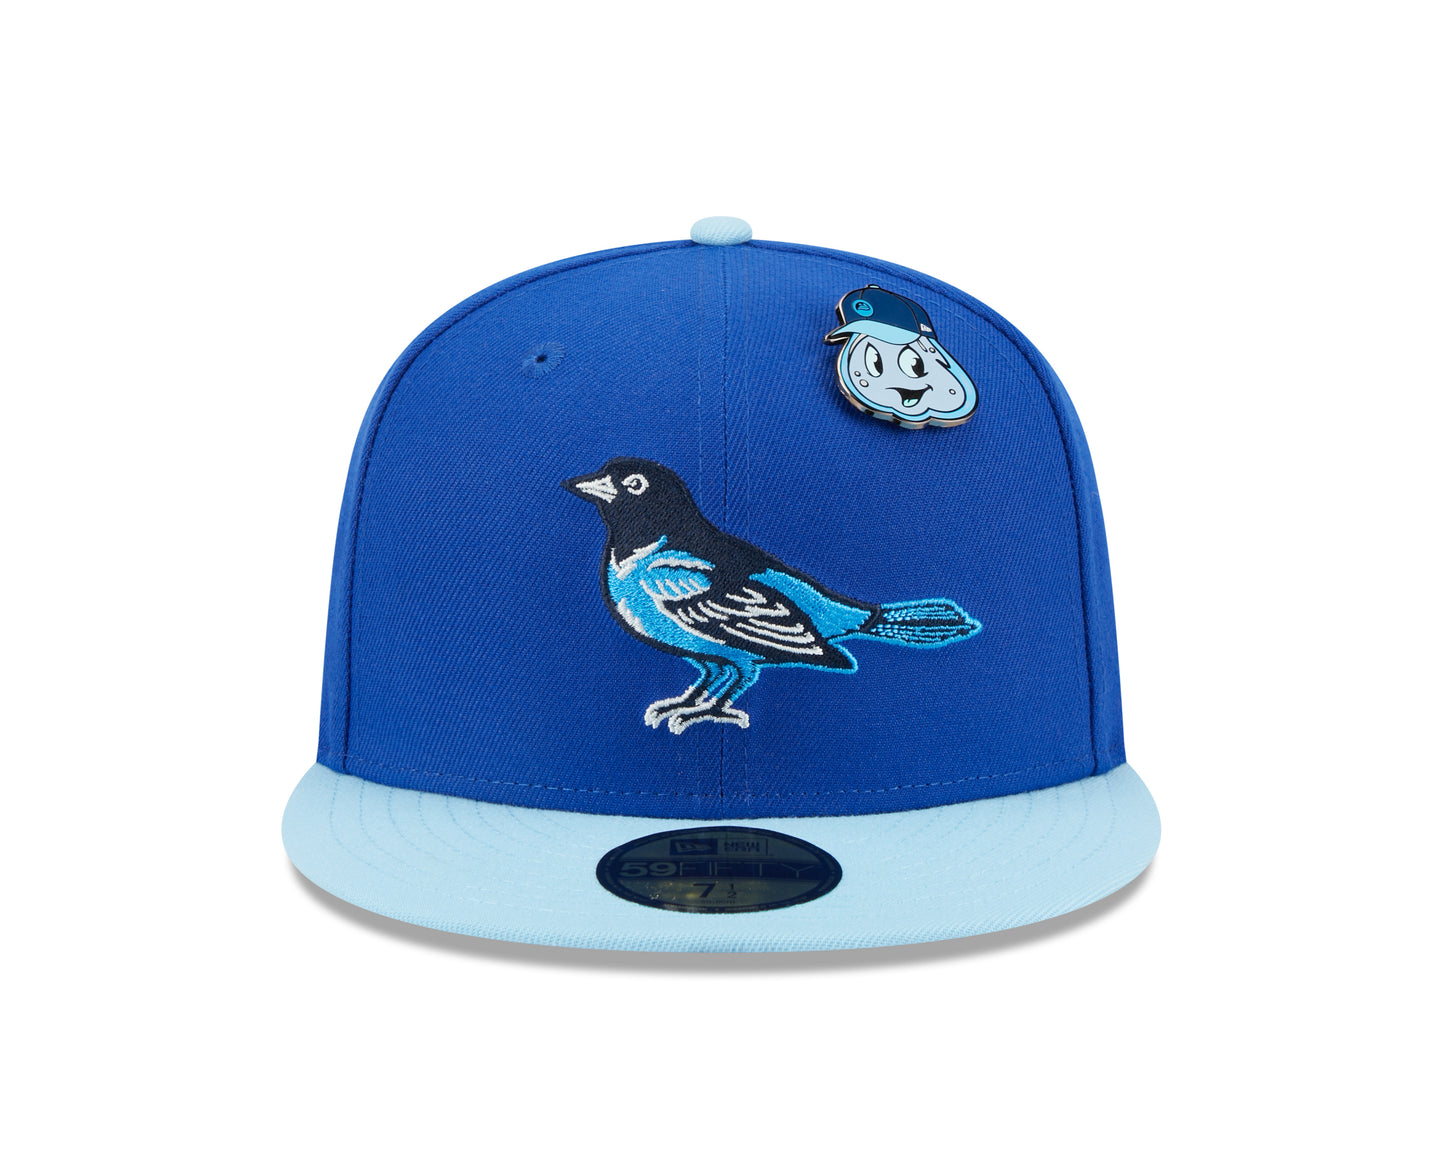 New Era 59fifty Fitted Cap Baltimore Orioles Cooperstown THE ELEMENTS - Blue/Sky Blue - Headz Up 